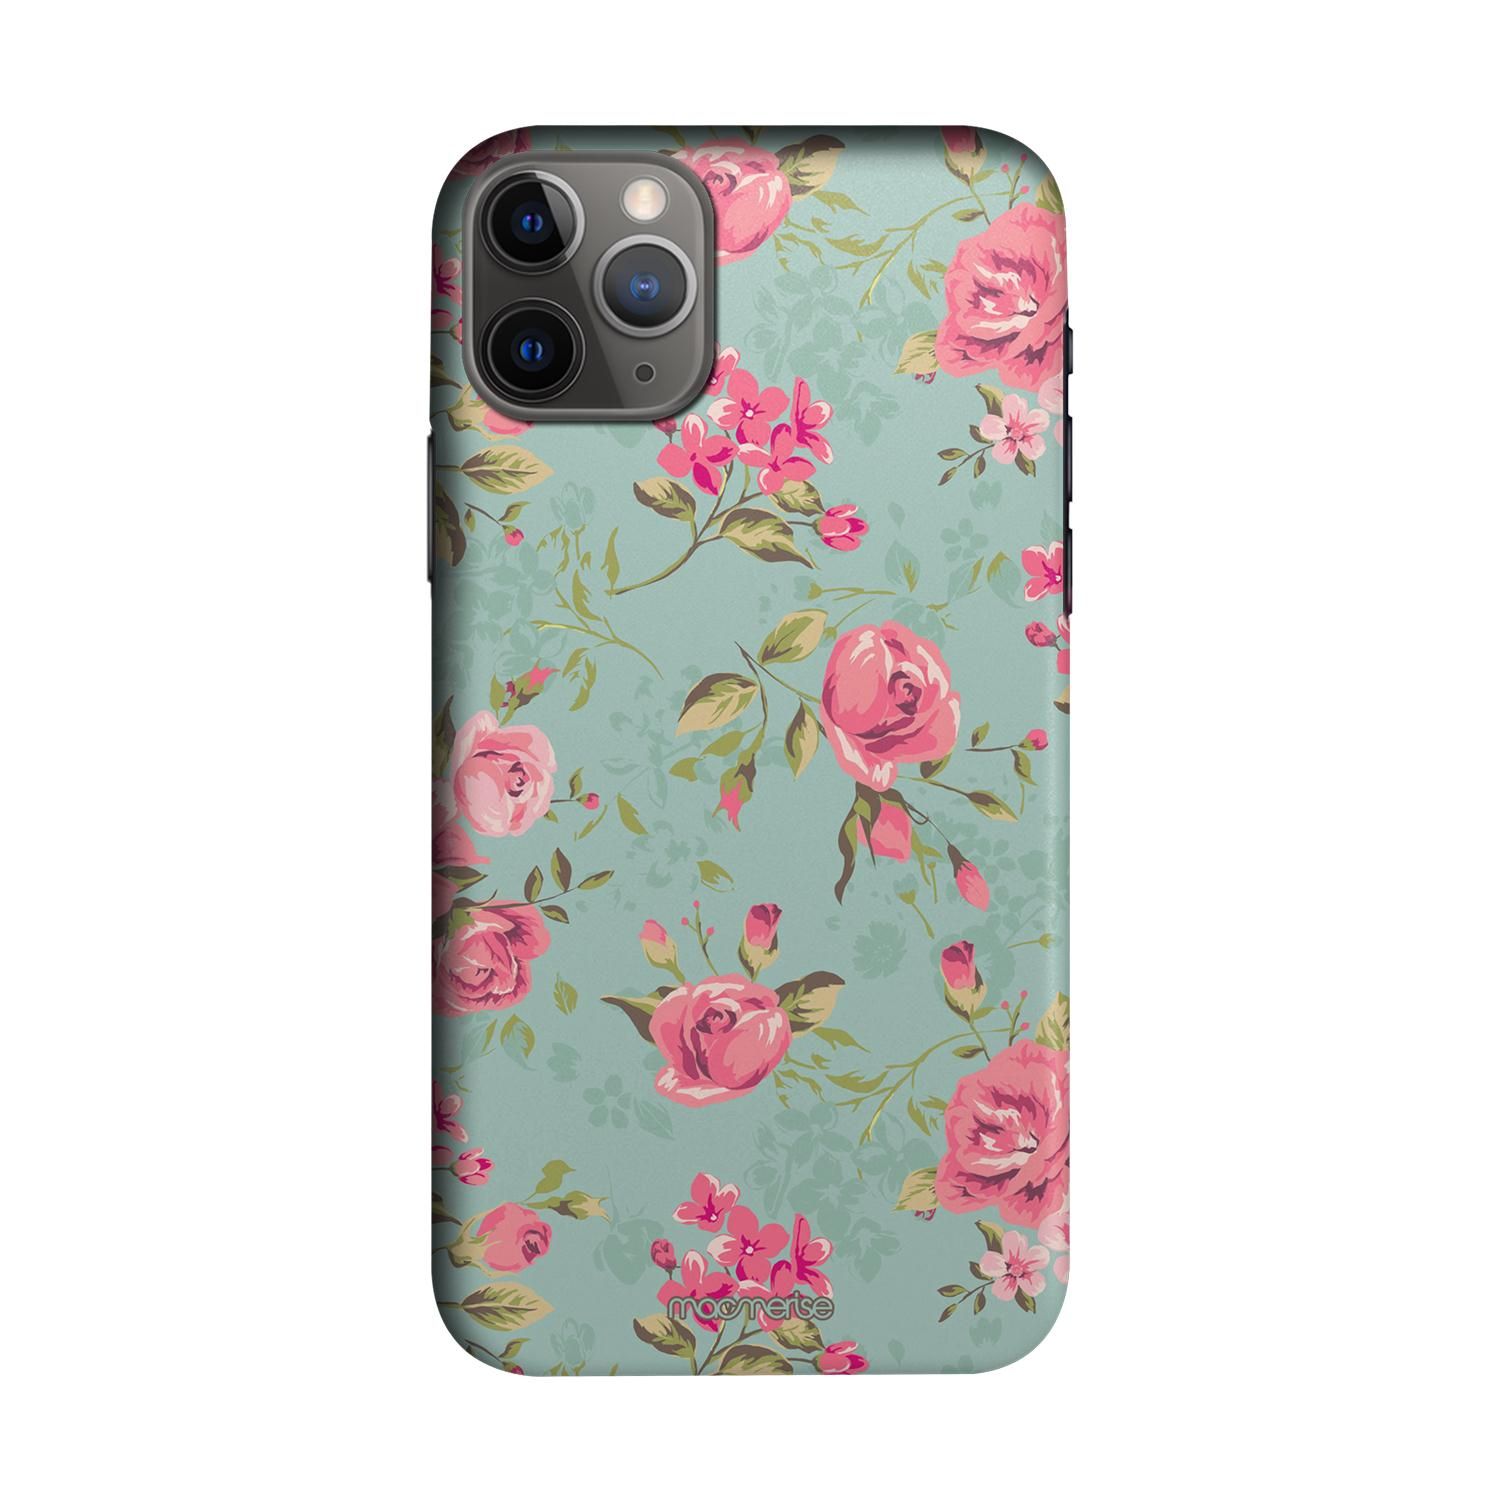 Buy Teal Pink Flowers - Sleek Phone Case for iPhone 11 Pro Max Online